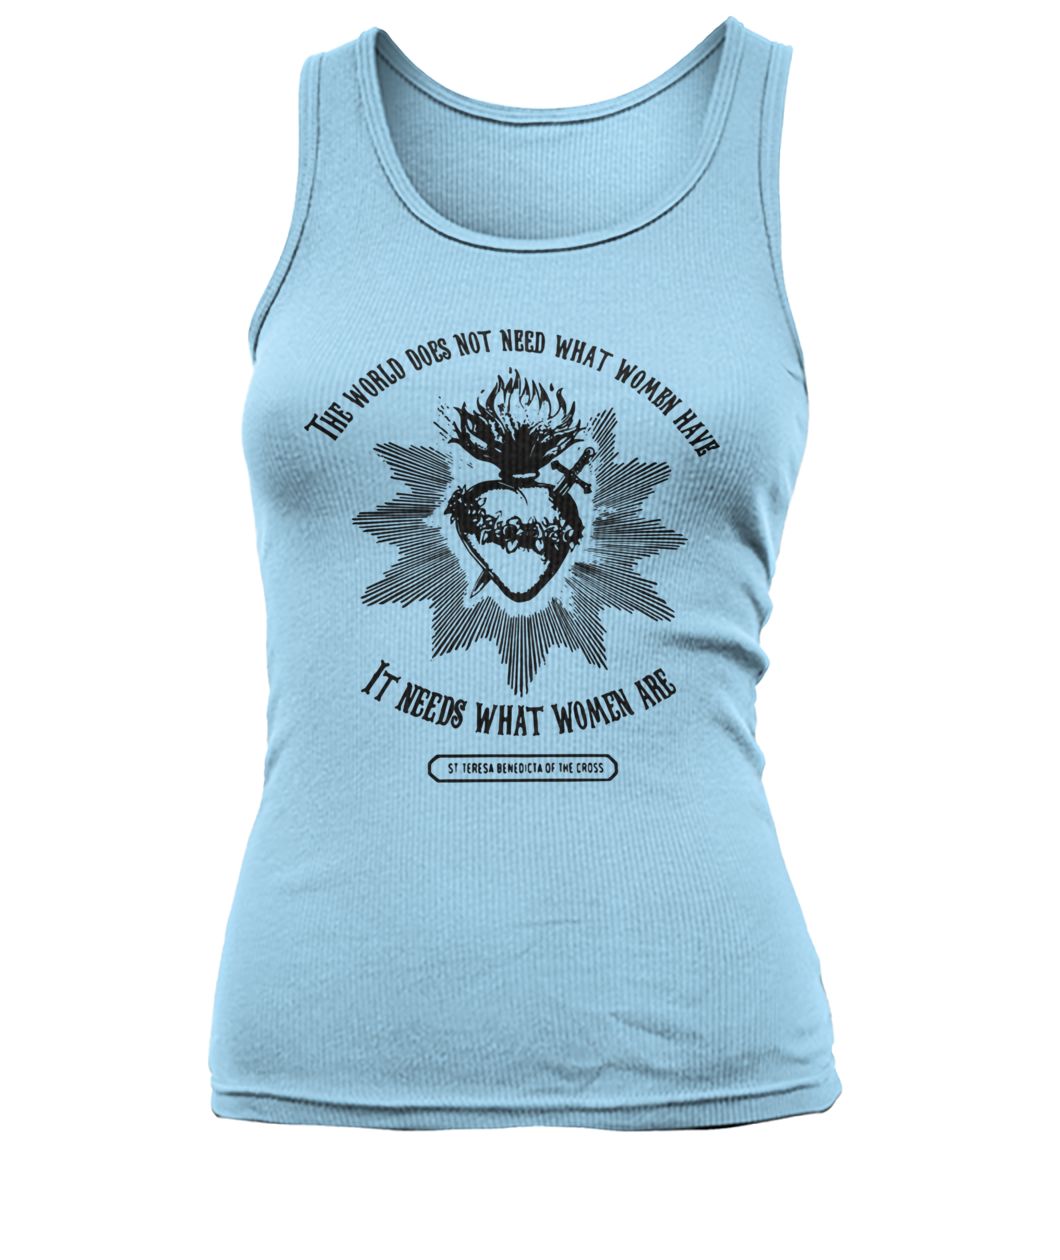 The world does not need what women have it needs women's tank top